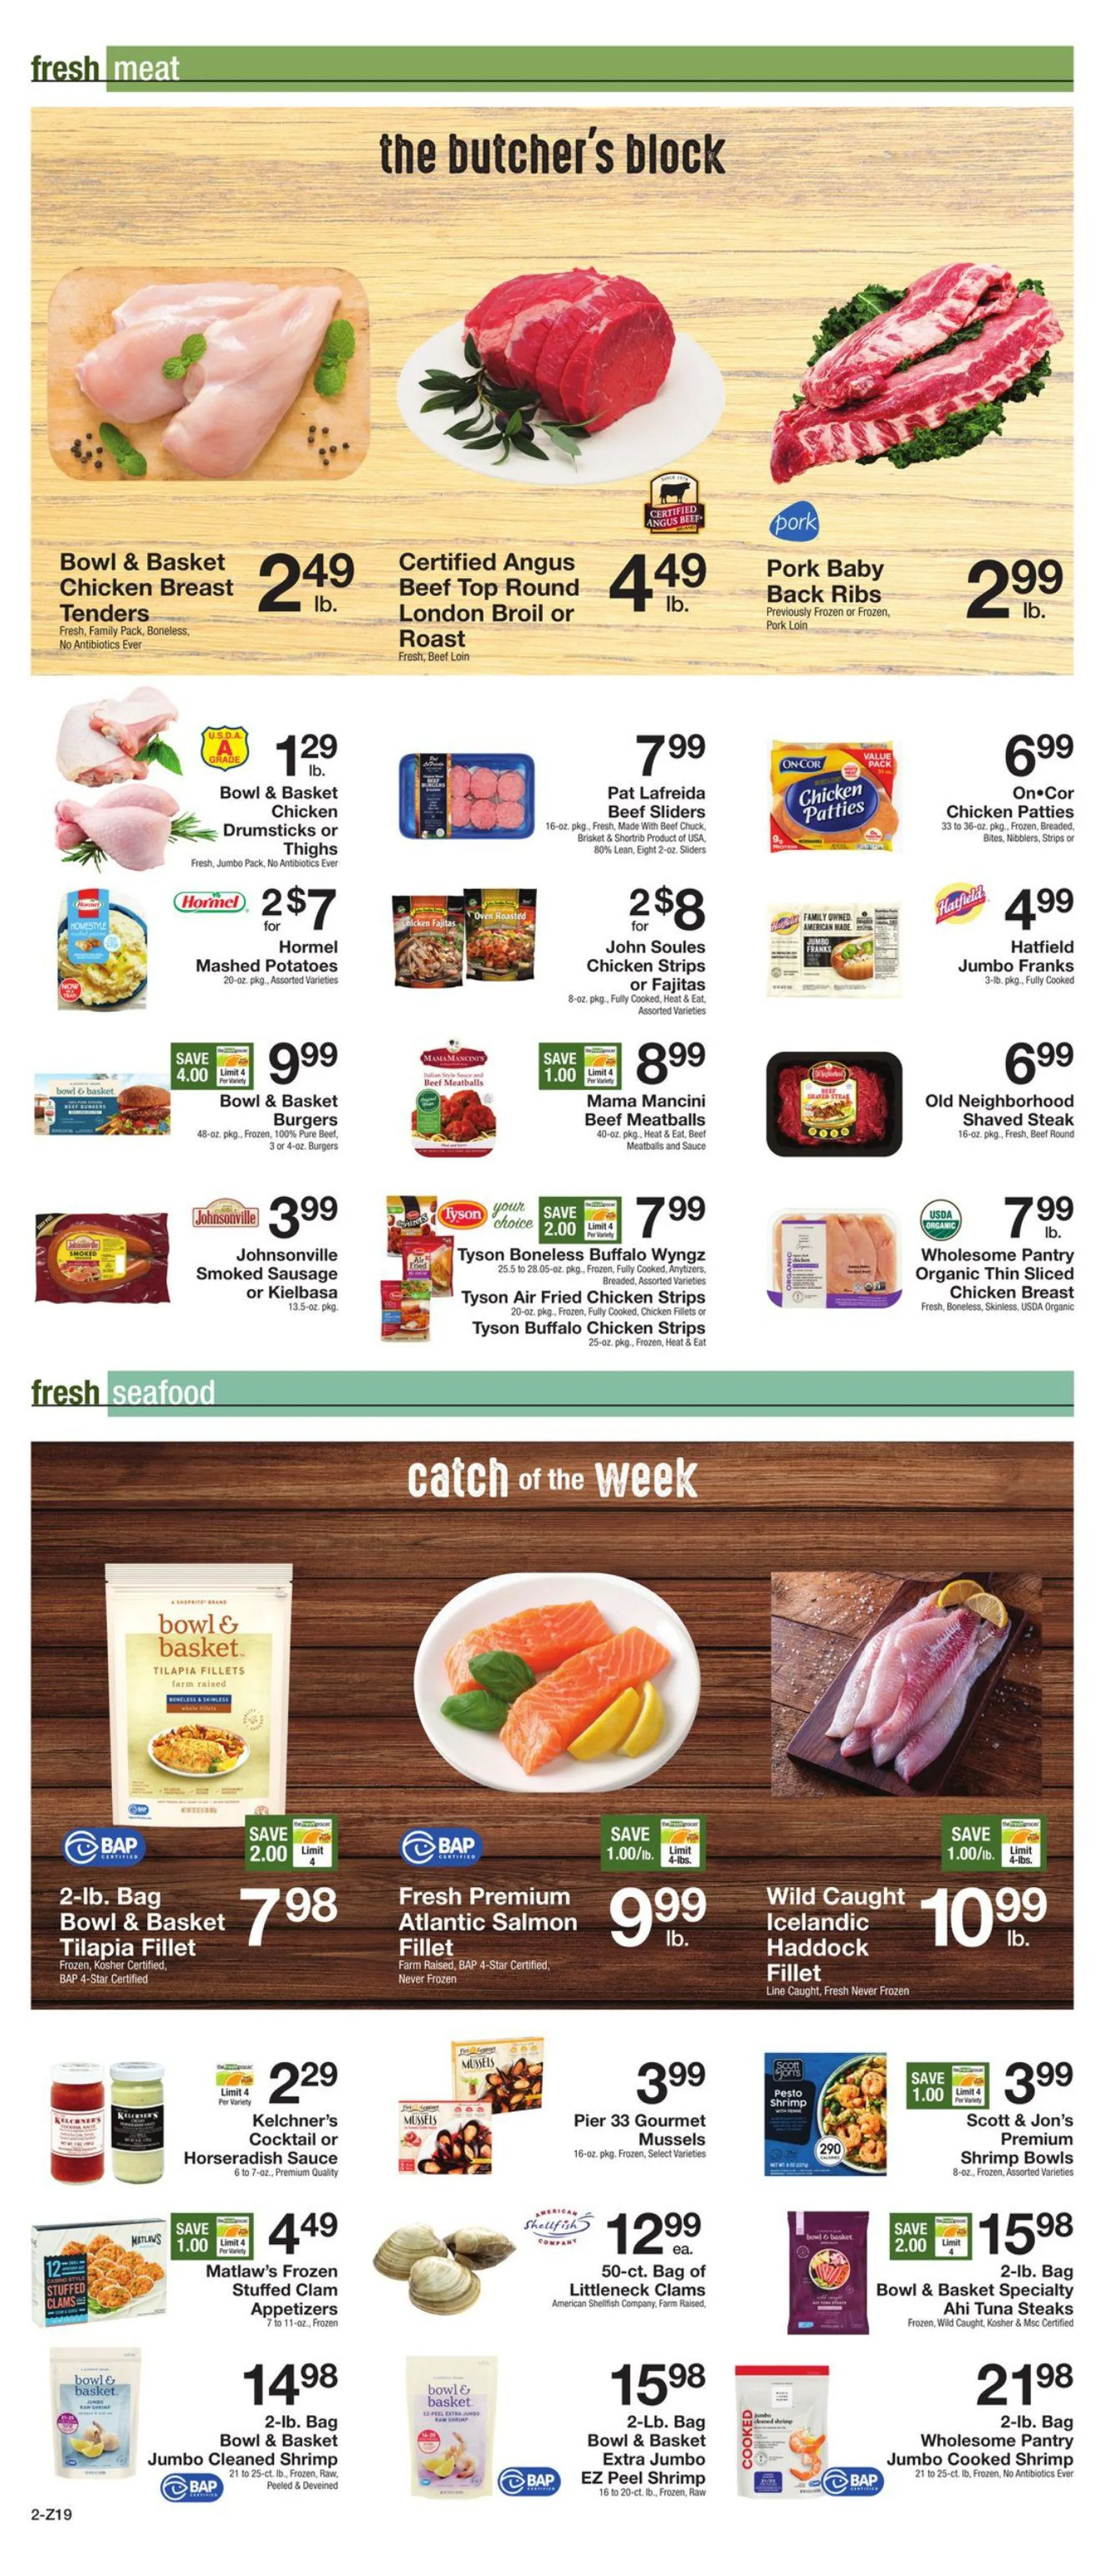 Gerritys Supermarkets Current weekly ad - 2